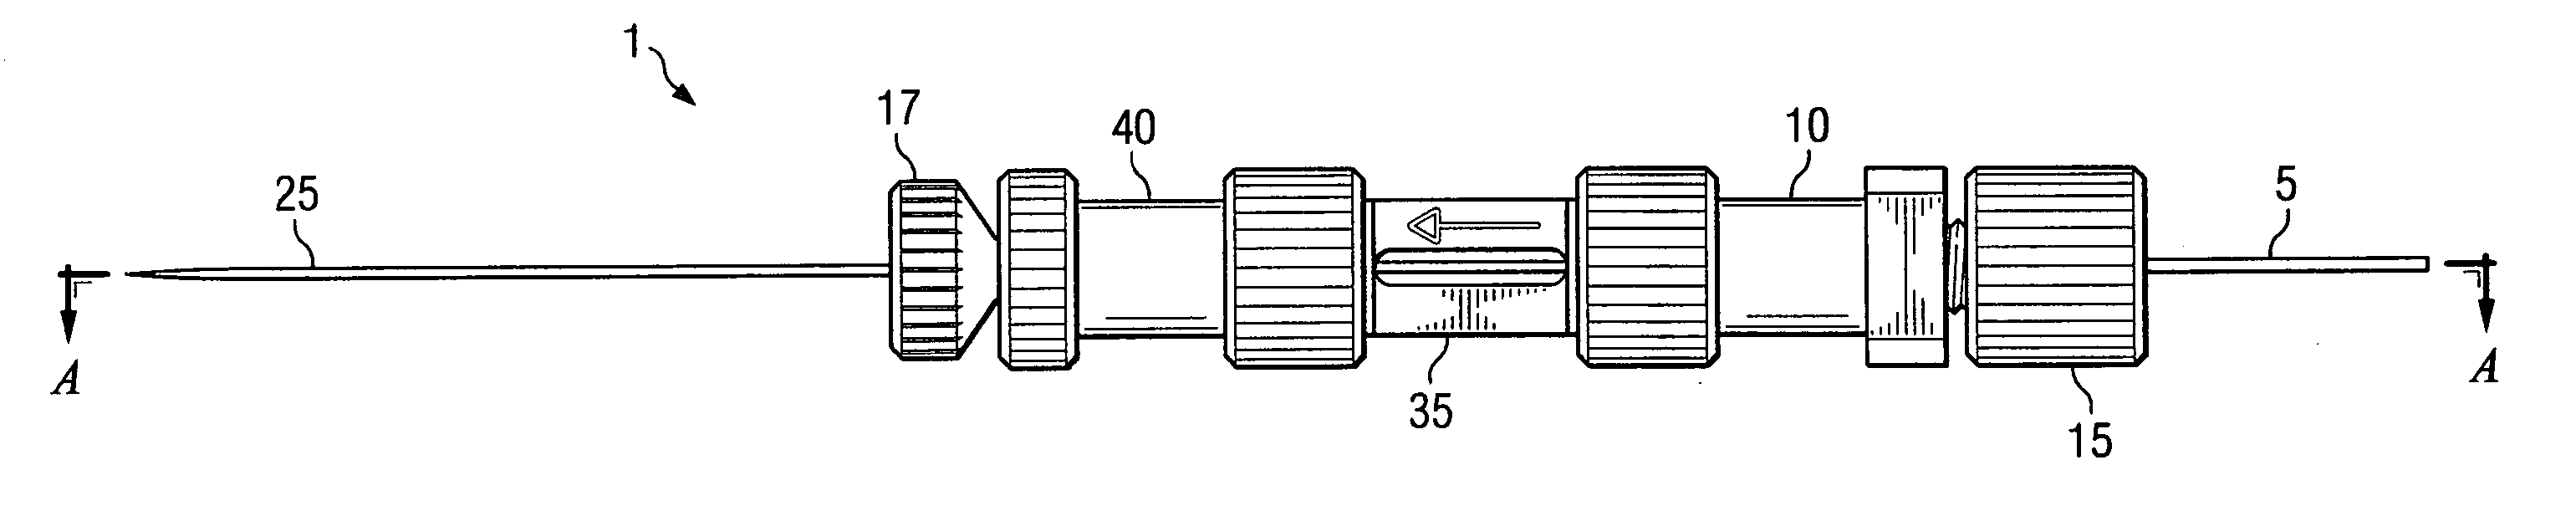 Apparatus and methods for electrospray applications